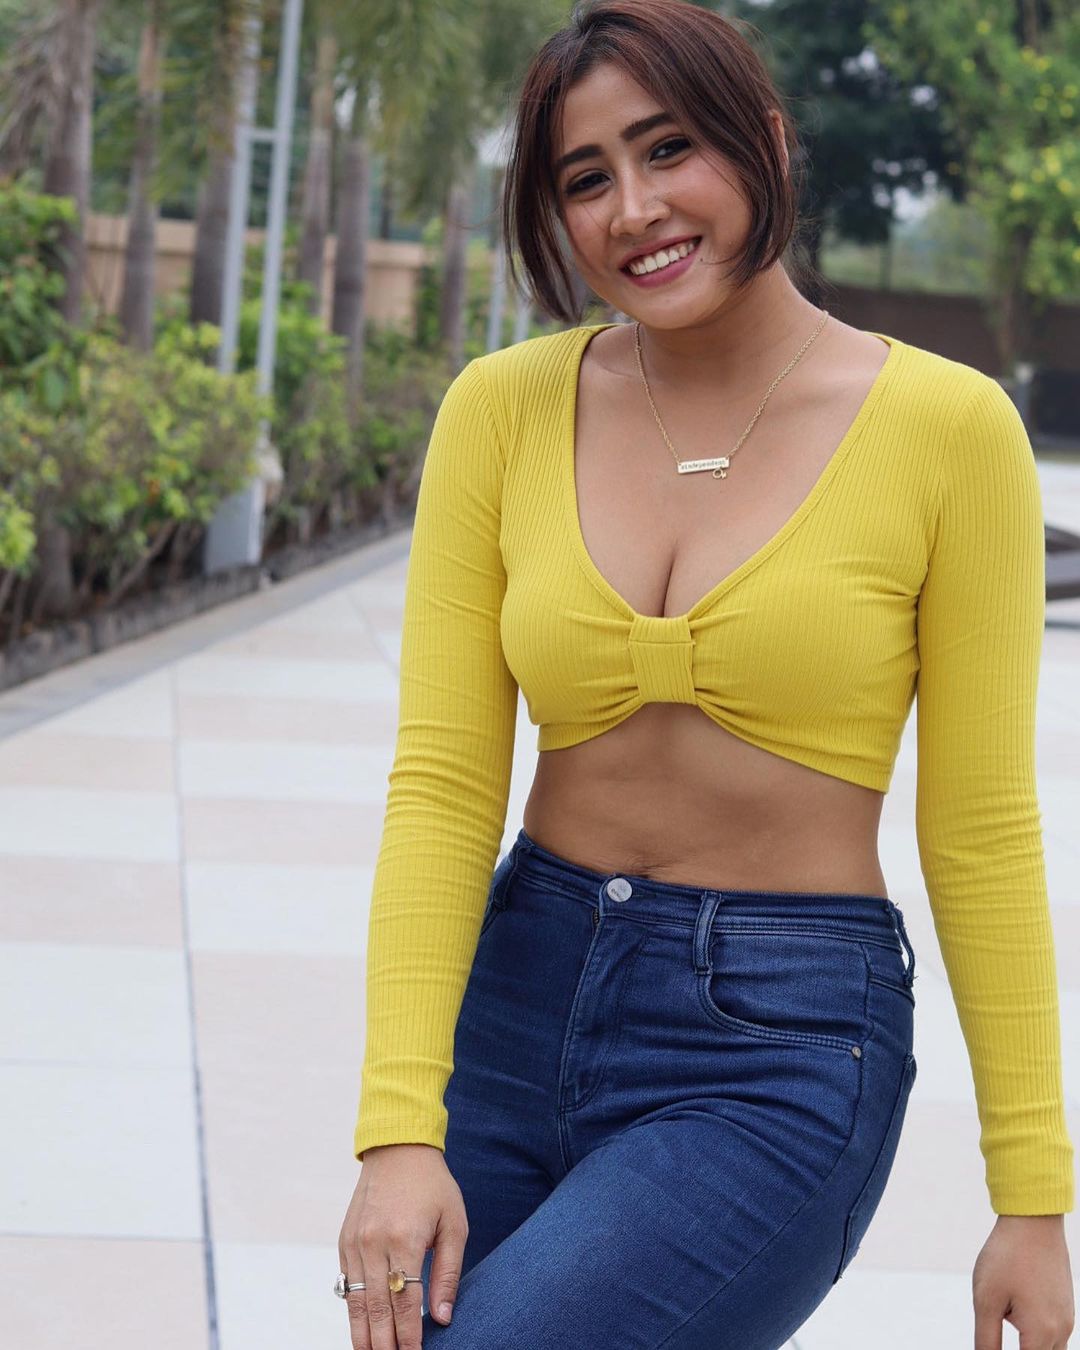 Sofia Ansari in Yellow Top and Blue Jeans